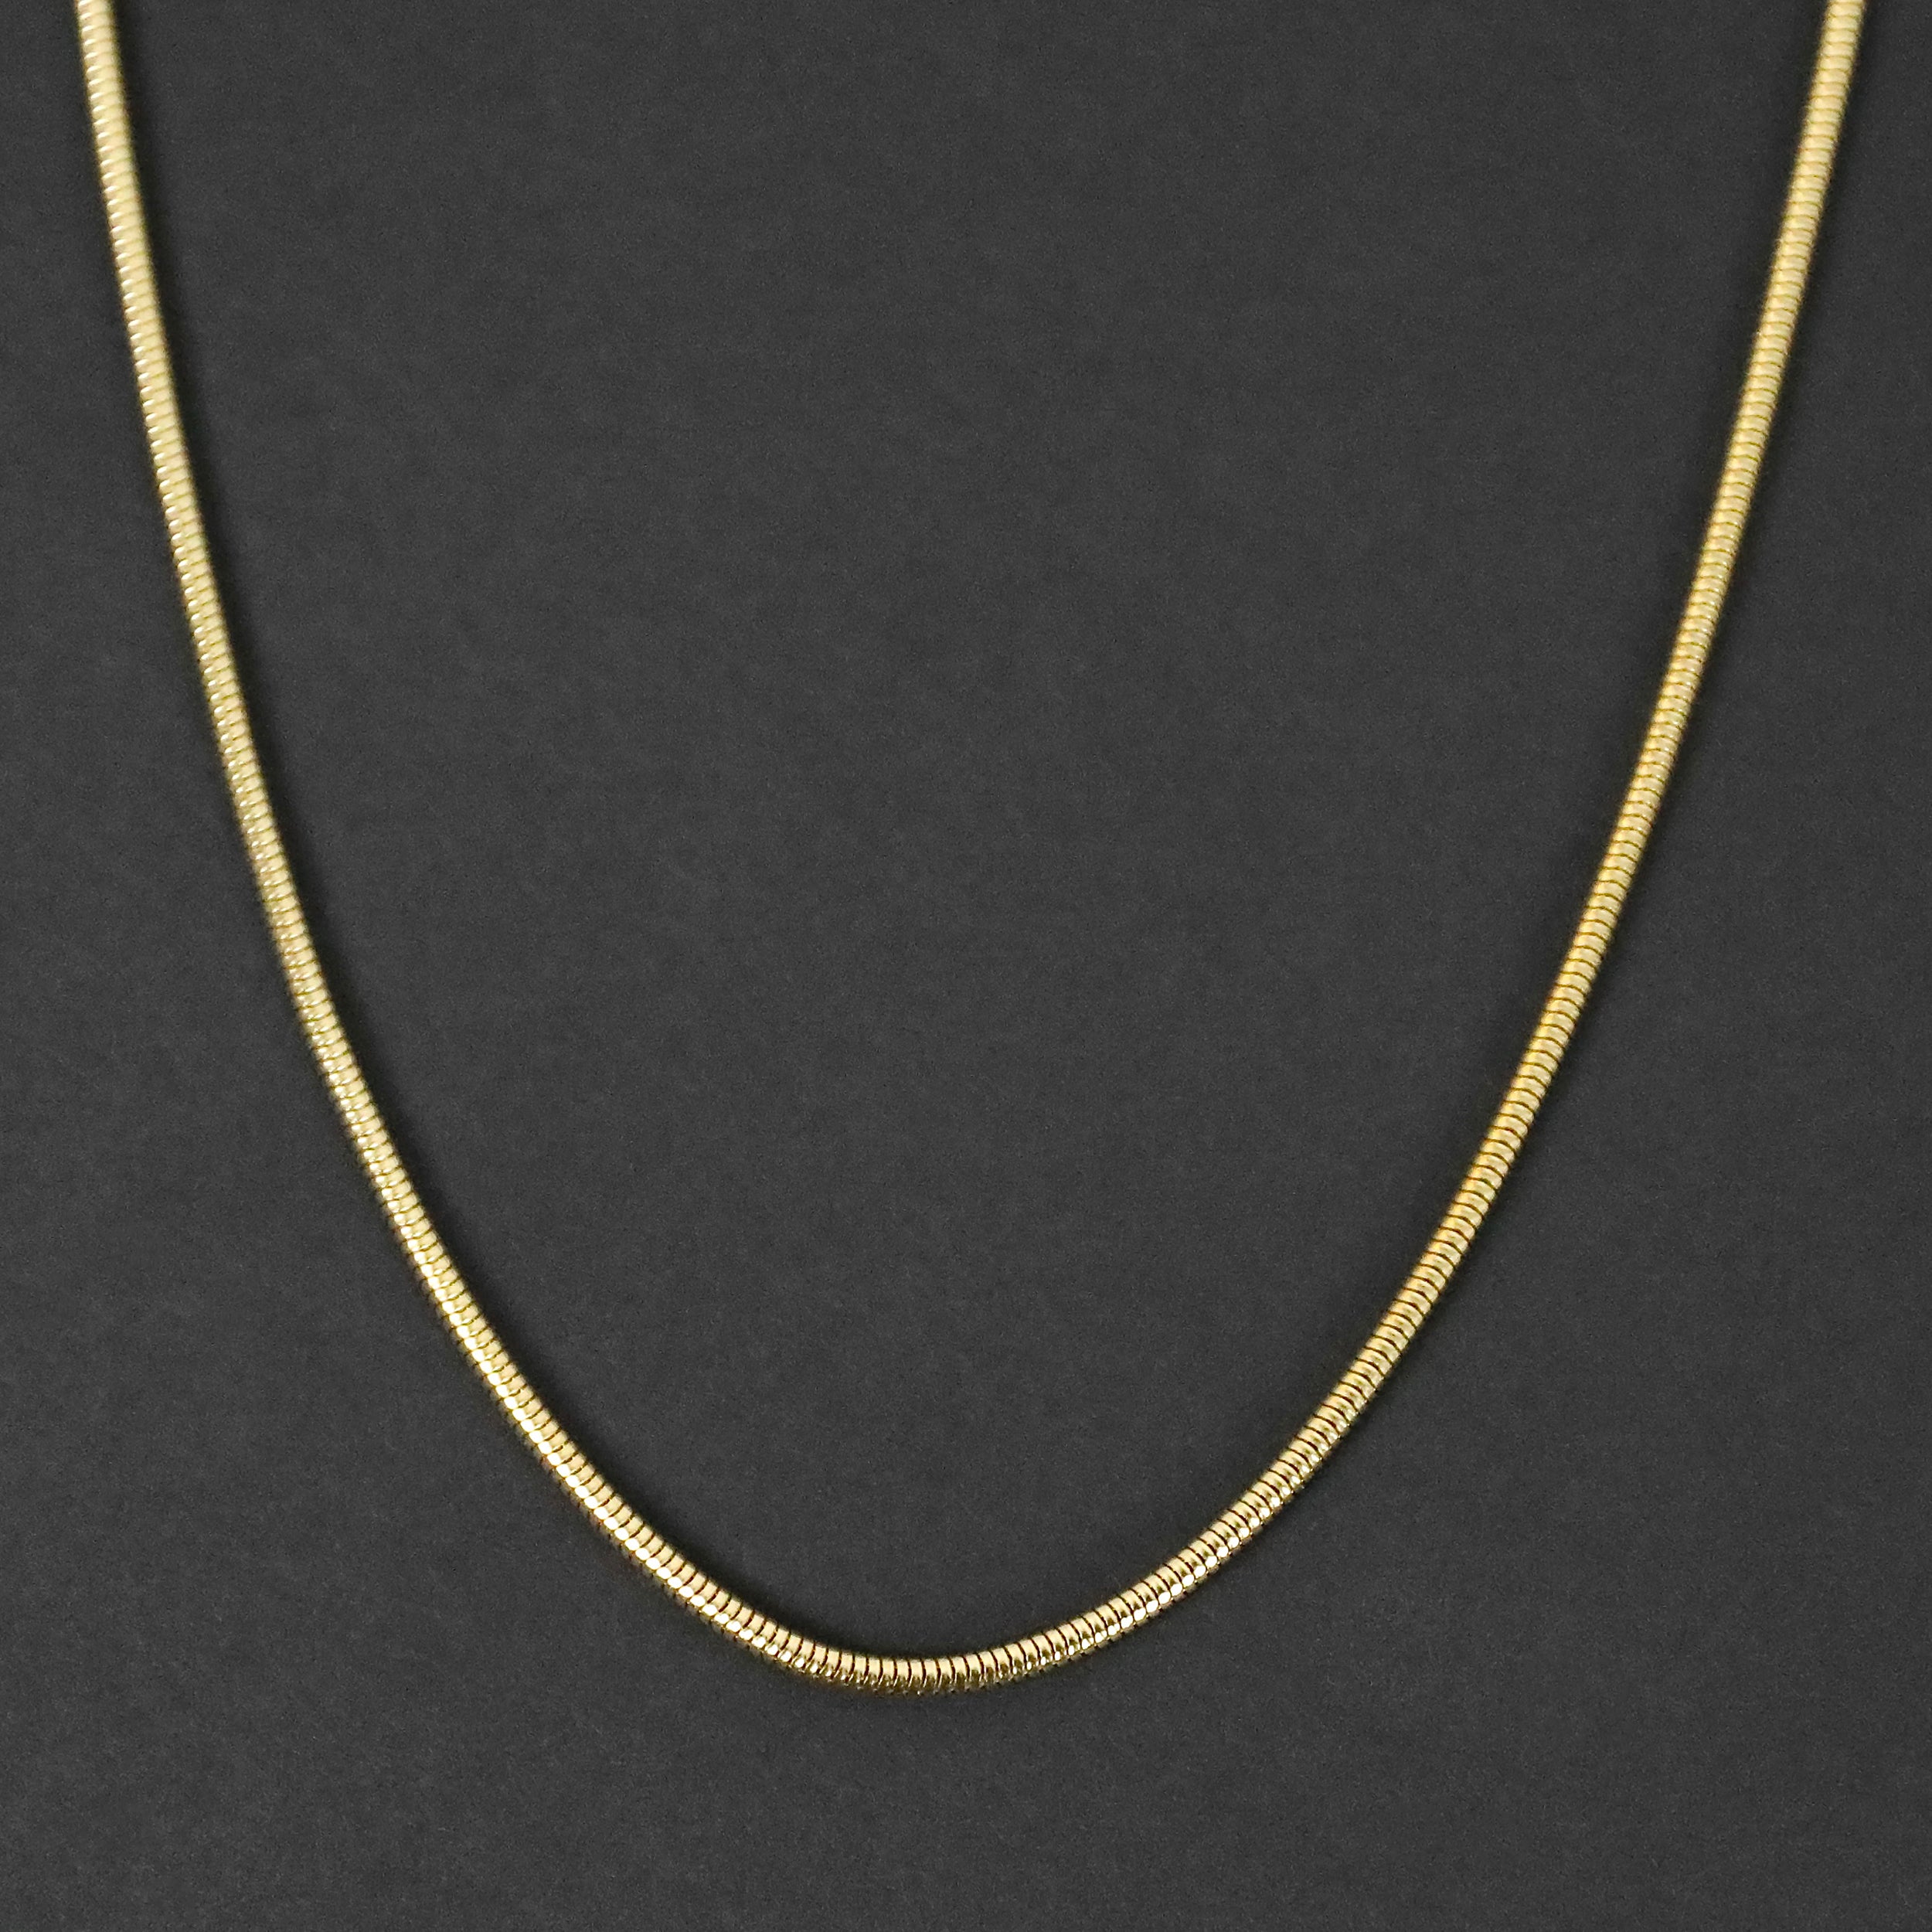 Snake Chain Necklace - Gold 2.4mm